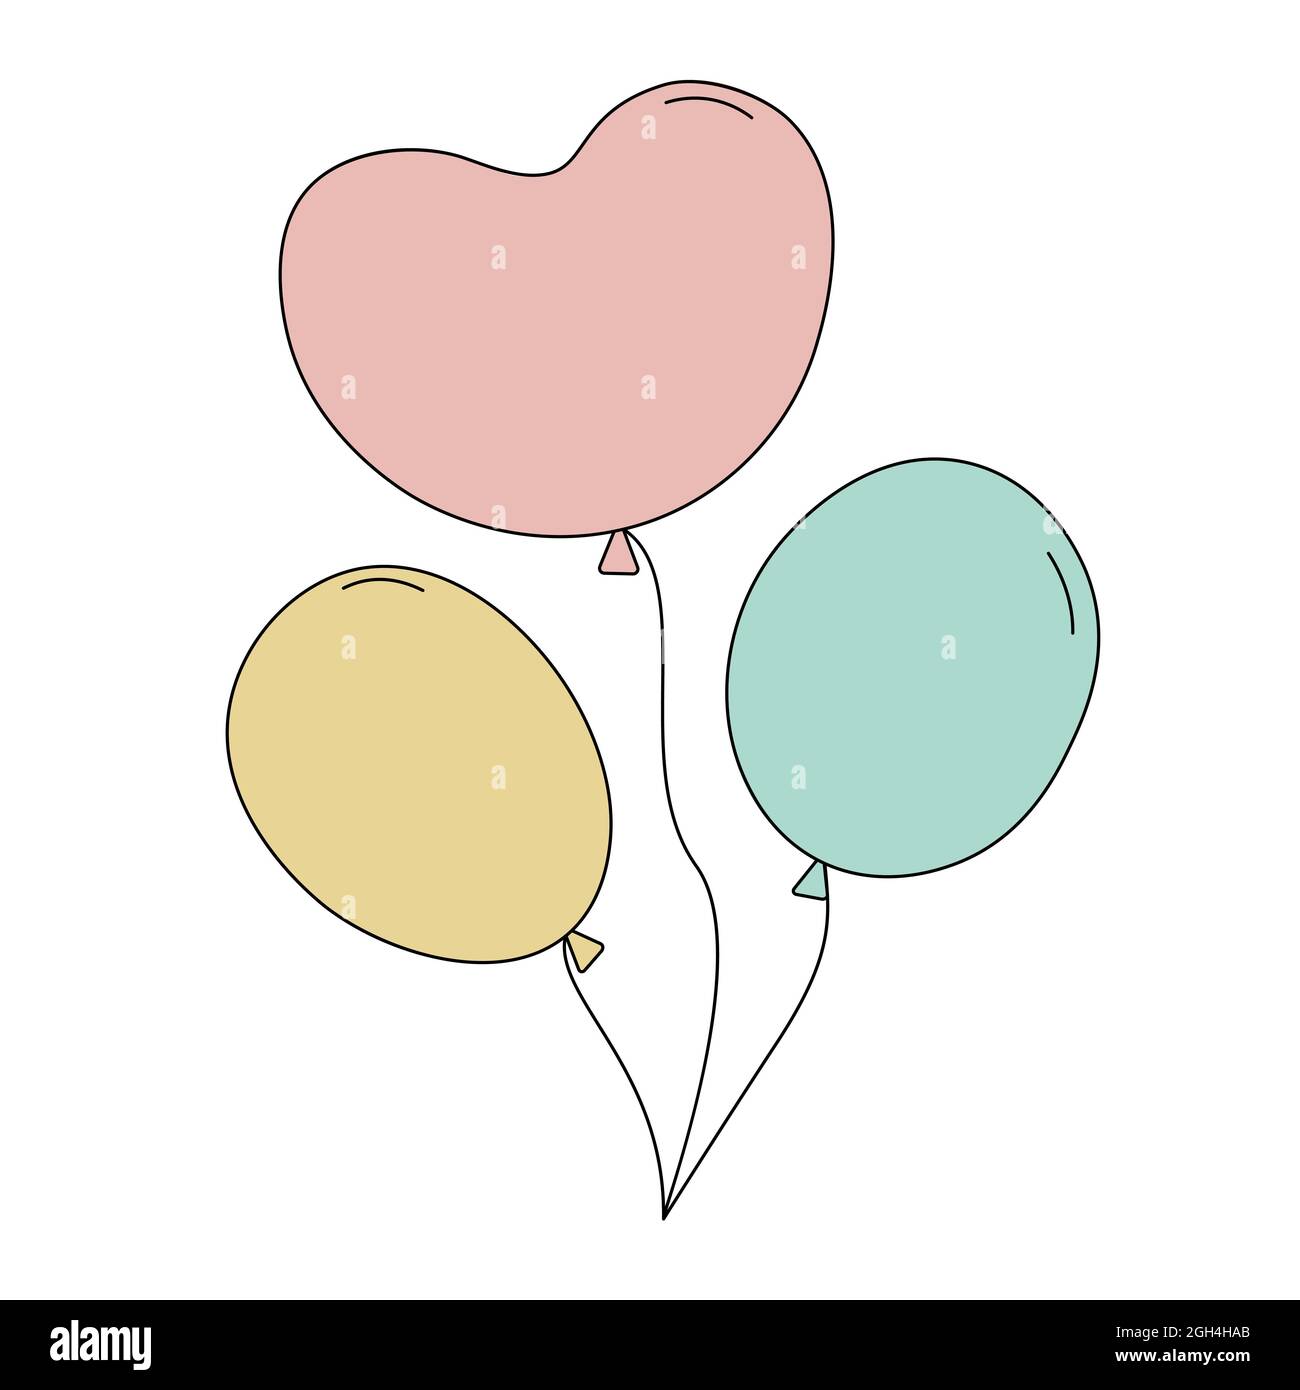 Color balloons in doodle style. Heart shaped balloon. Vector illustration isolated on white background. Festive decoration for party, birthday, weddin Stock Vector